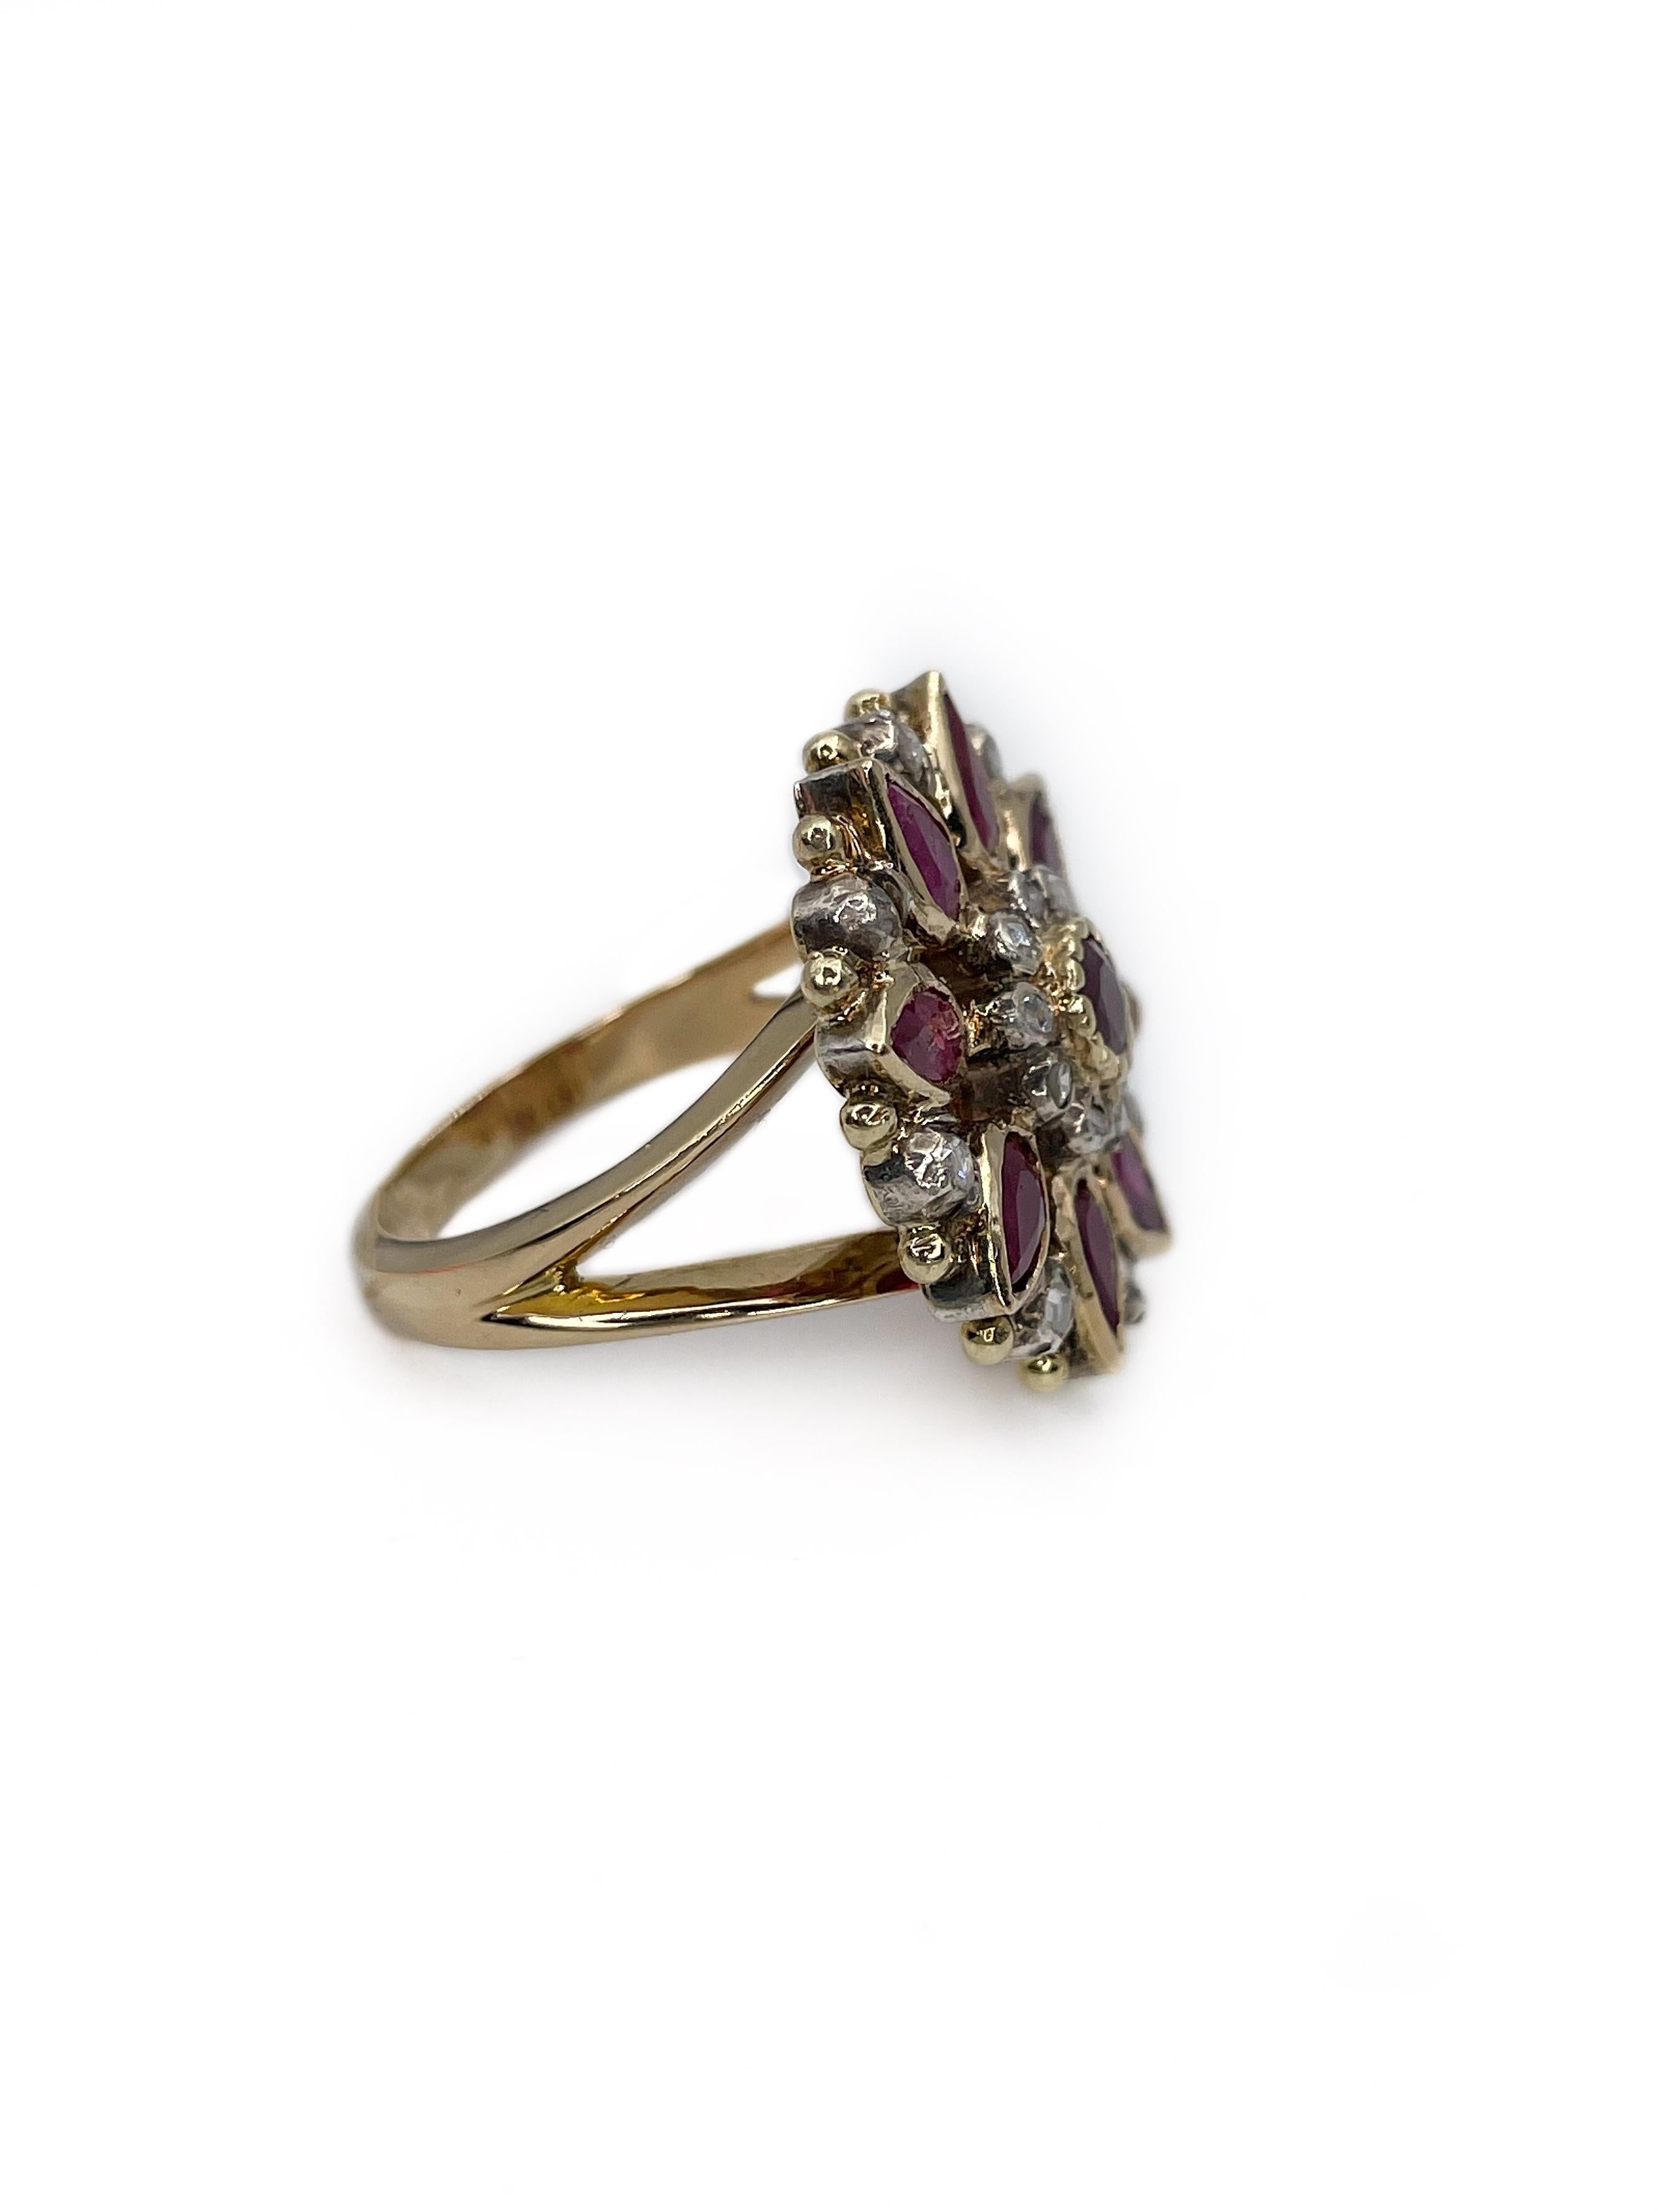 This is a magnificent Victorian ring crafted in 18K (shank) and 14K (head) gold. It is adorned with 925 hallmark silver. The piece features 9 rubies, that in total weight ~2.14ct (H, F). The gems are accompanied with 18 rose cut diamonds (~0.27ct,